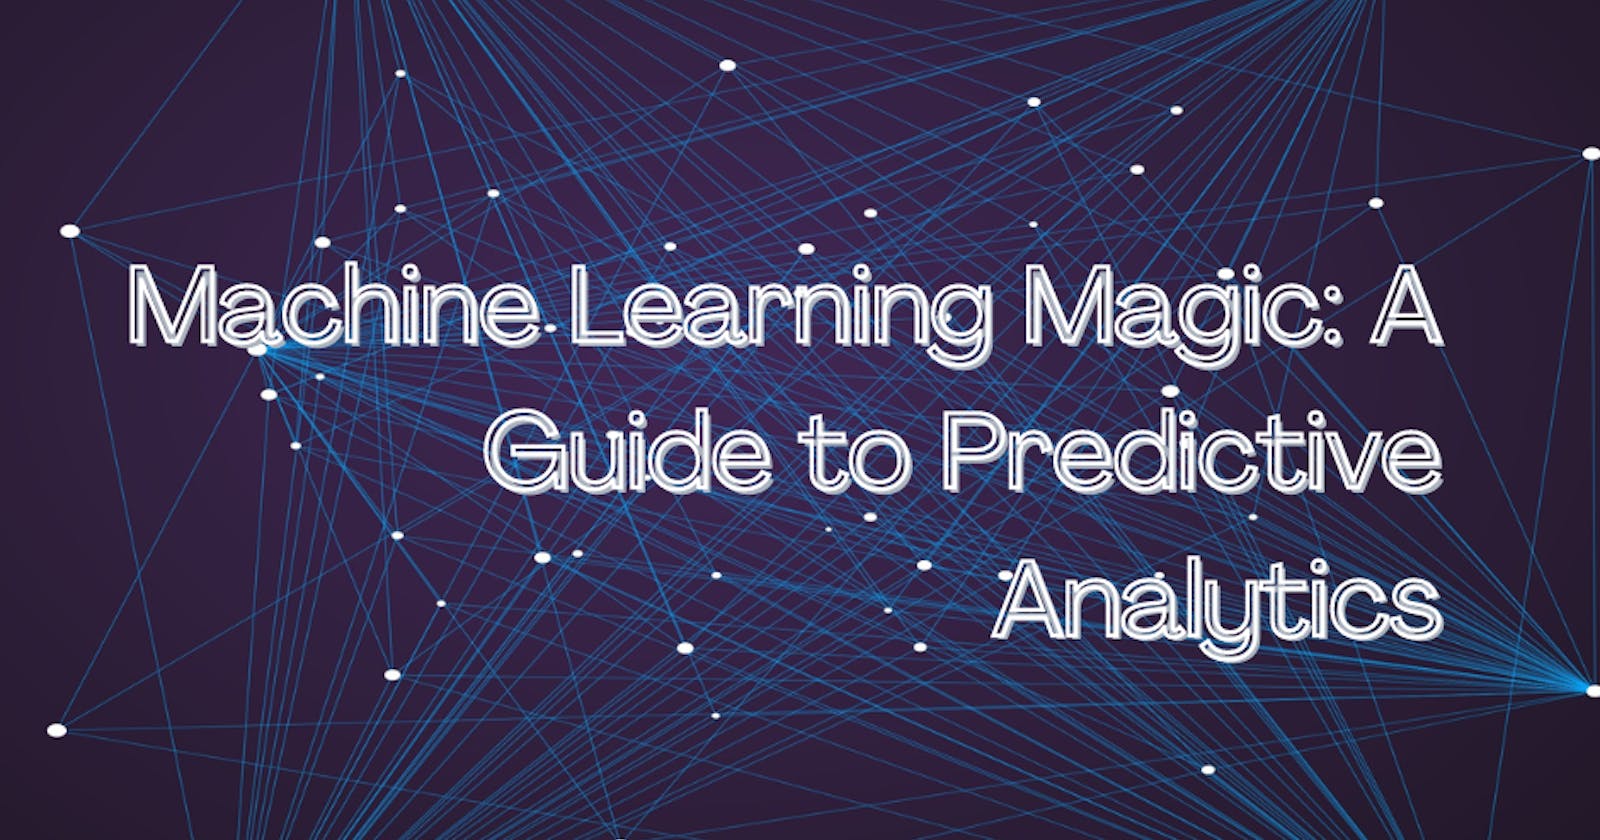 Machine Learning Magic: A Guide to Predictive Analytics